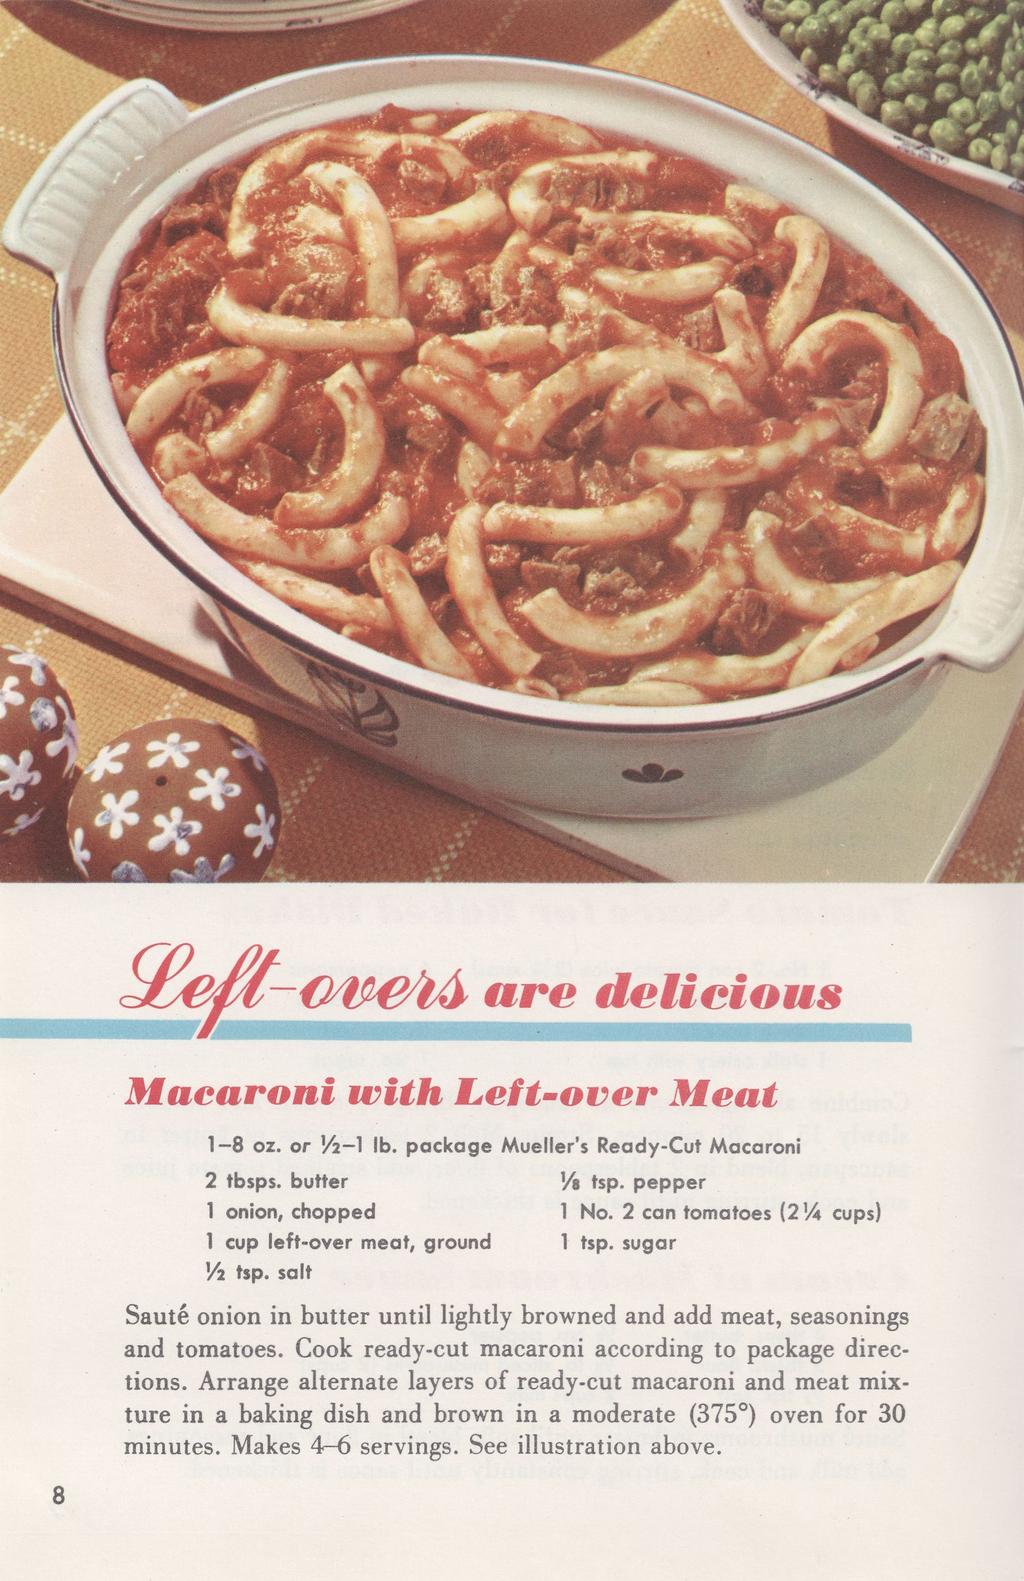 Macaroni with Left-over Meat 1-8 oz. or V2-I lb. package Mueller's Ready-Cut Macaroni 2 tbsps. butter VB tsp. pepper 1 onion, chopped 1 No.